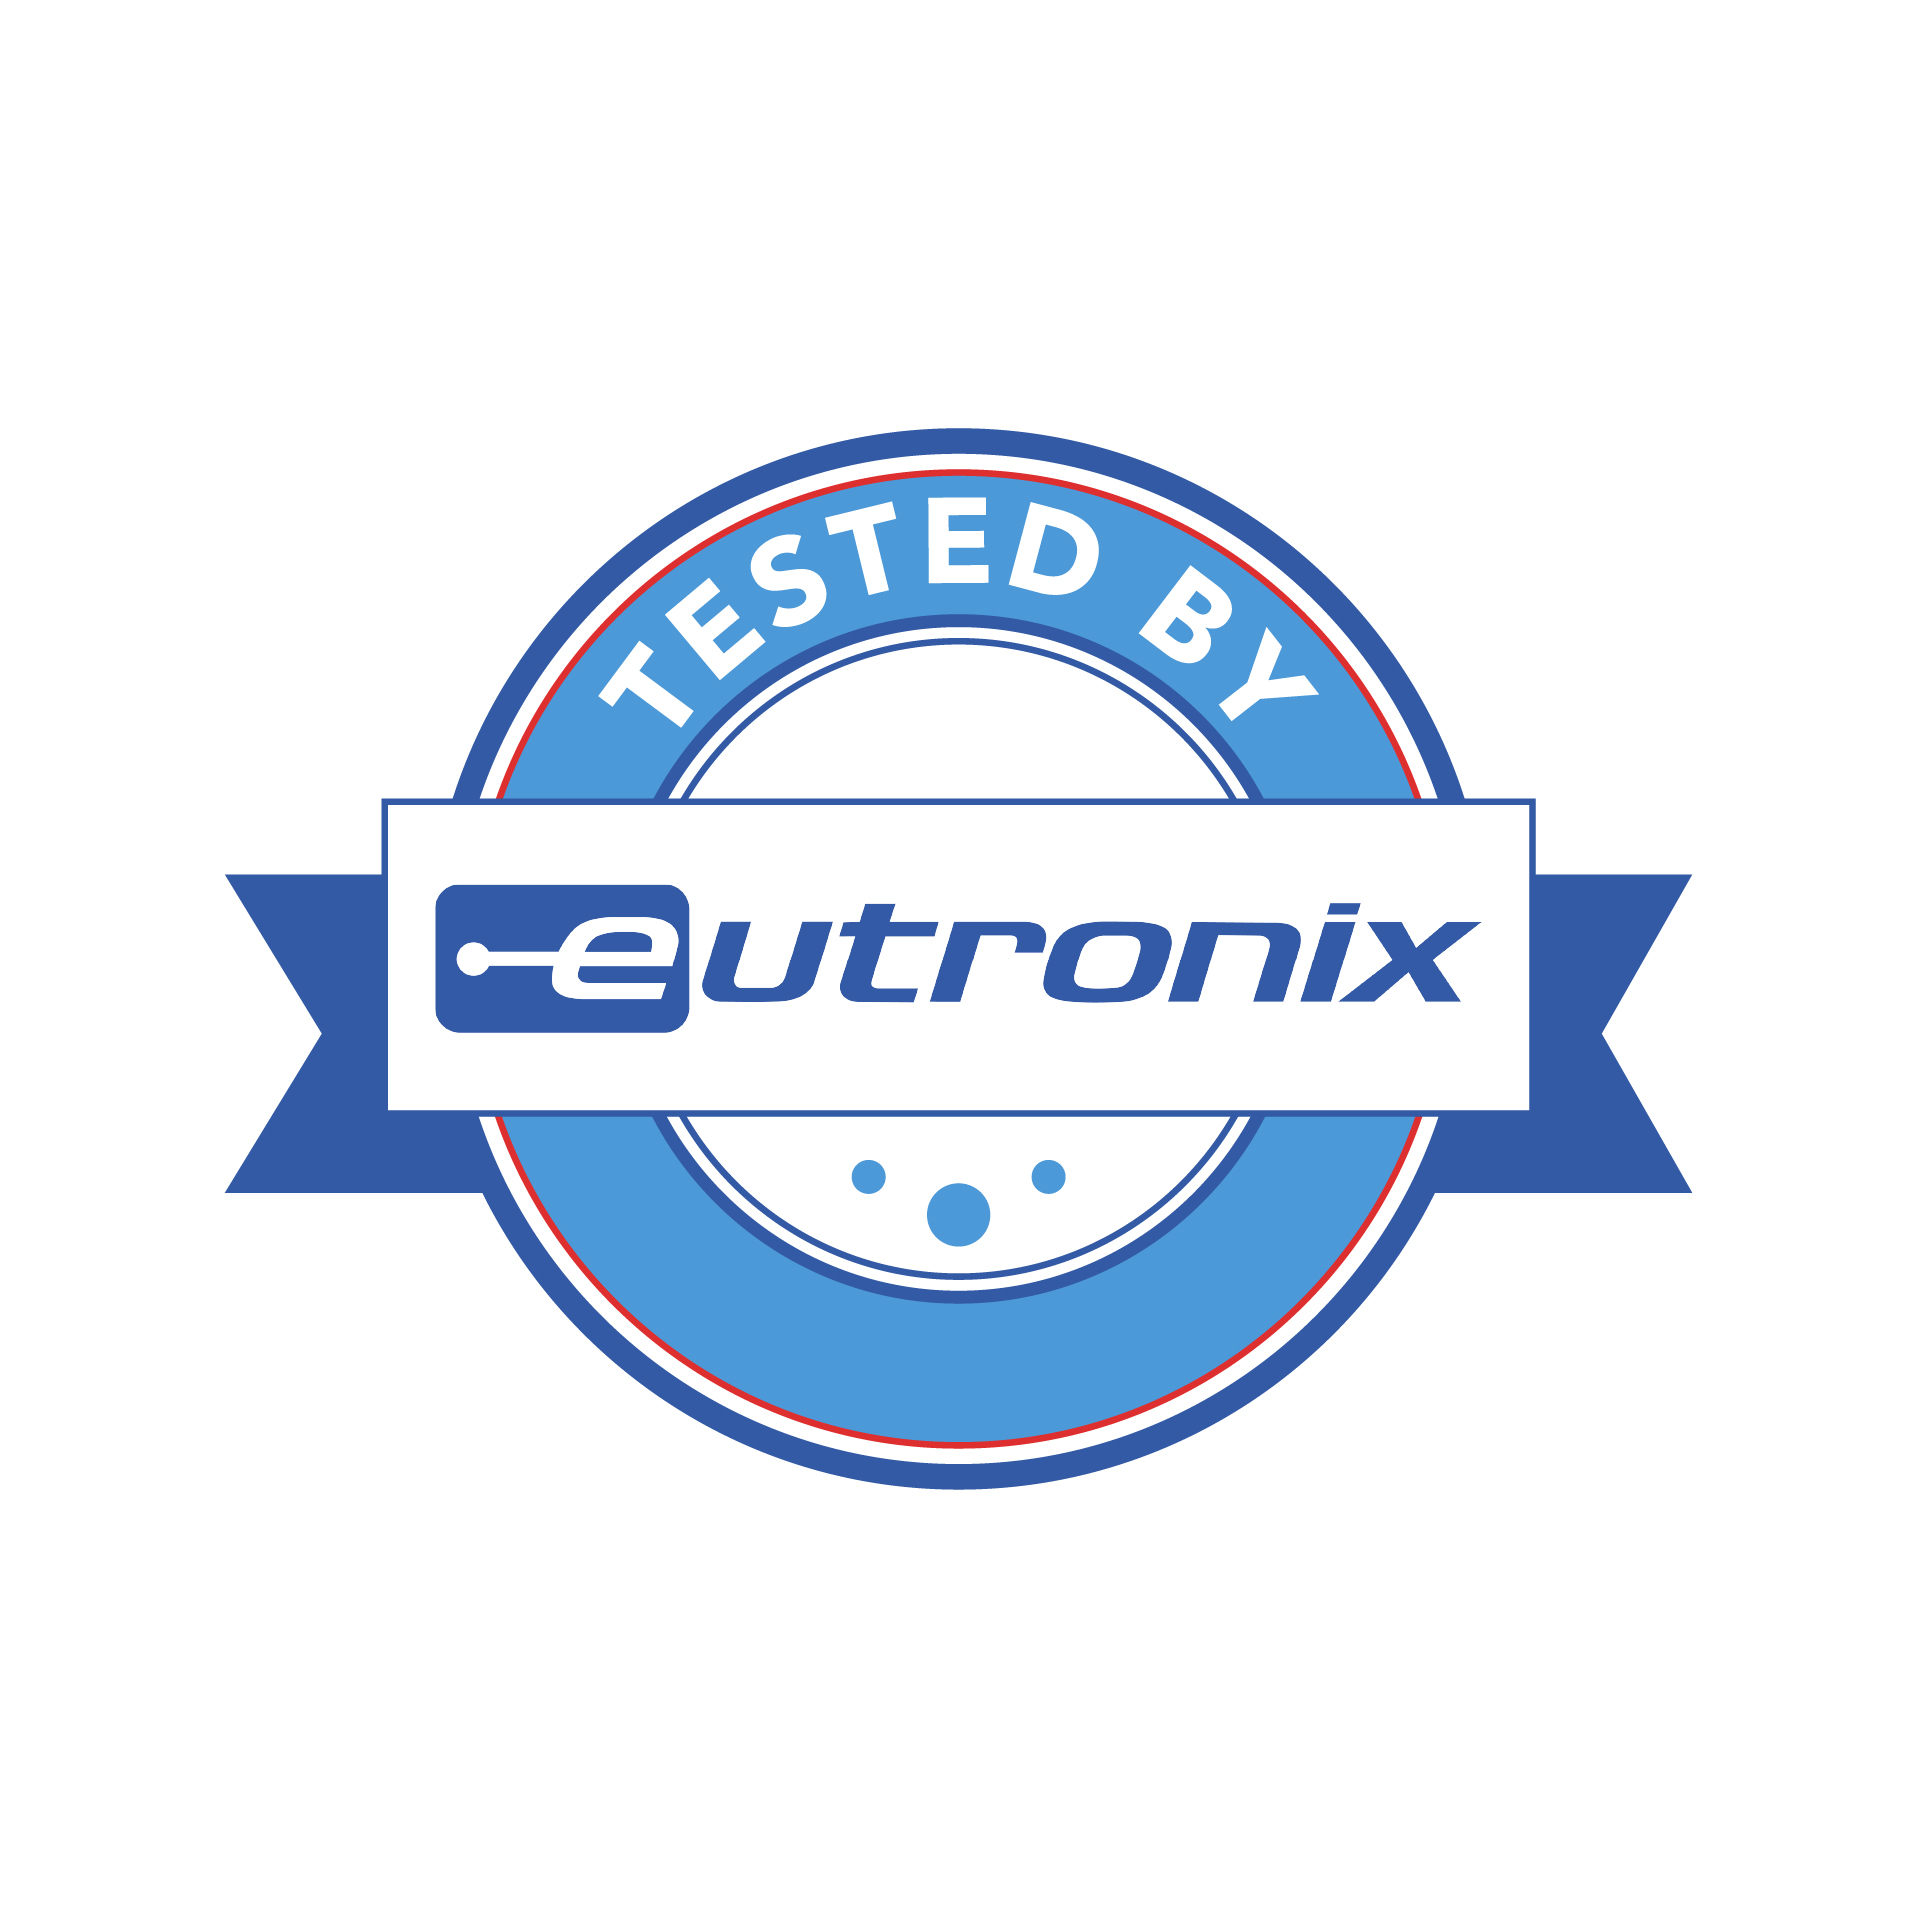 tested by Eutronix